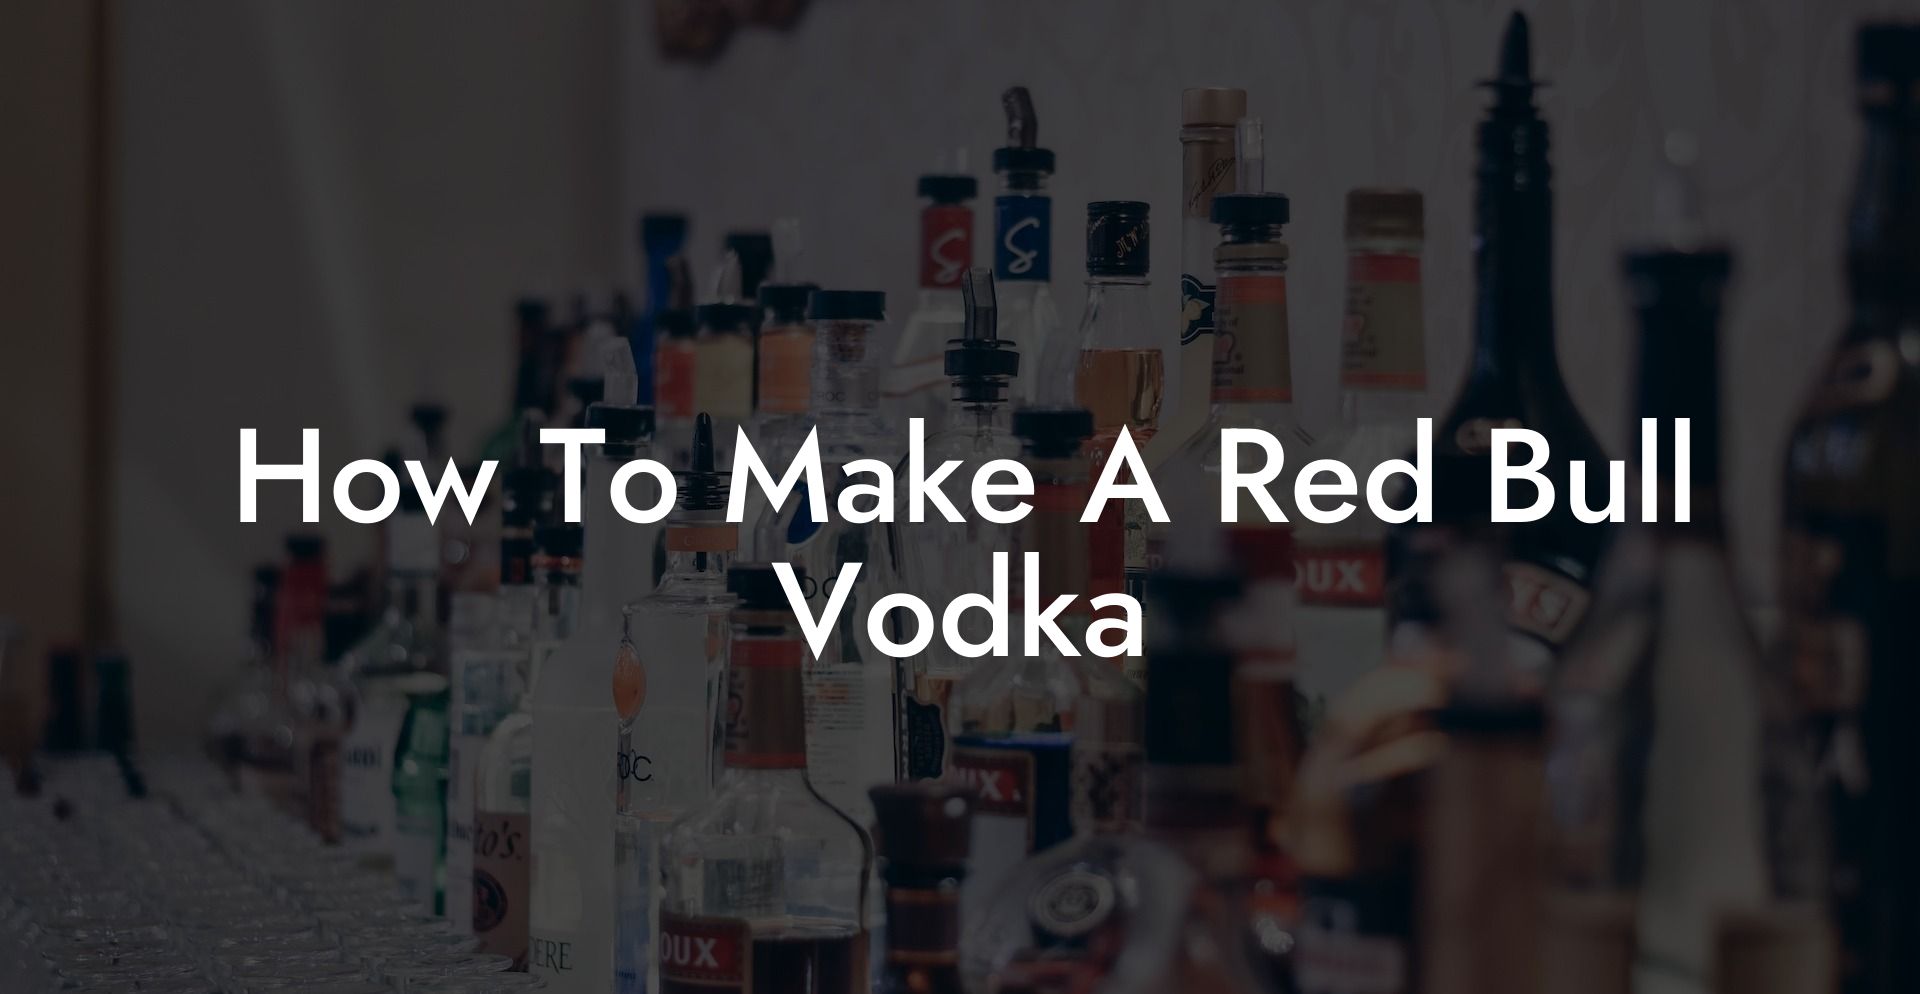 How To Make A Red Bull Vodka